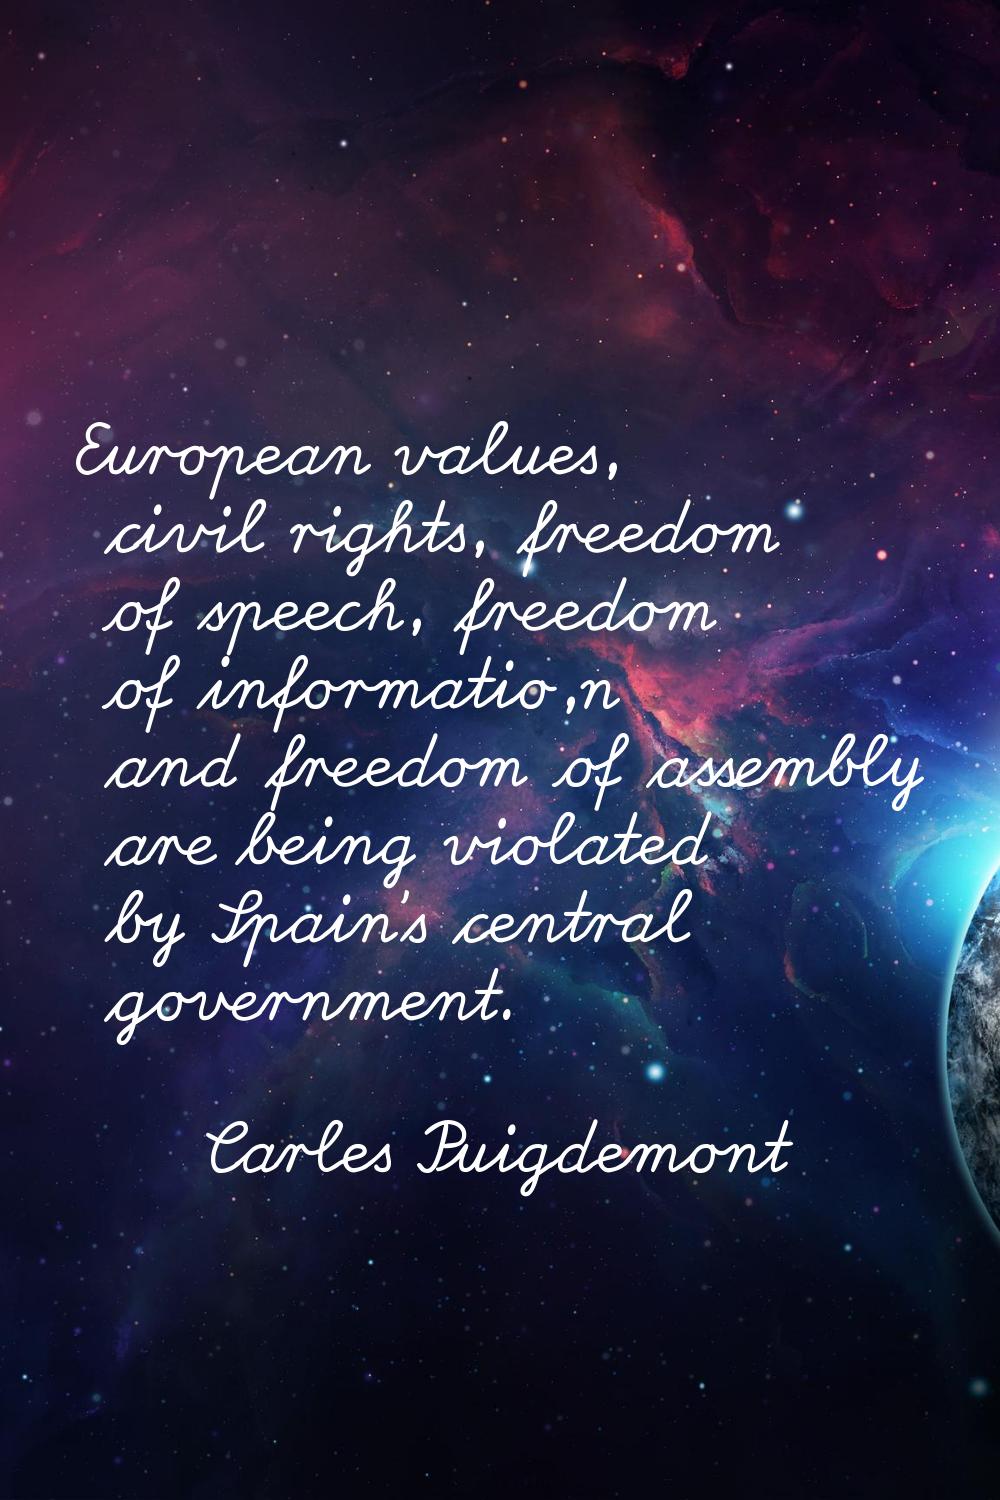 European values, civil rights, freedom of speech, freedom of informatio,n and freedom of assembly a